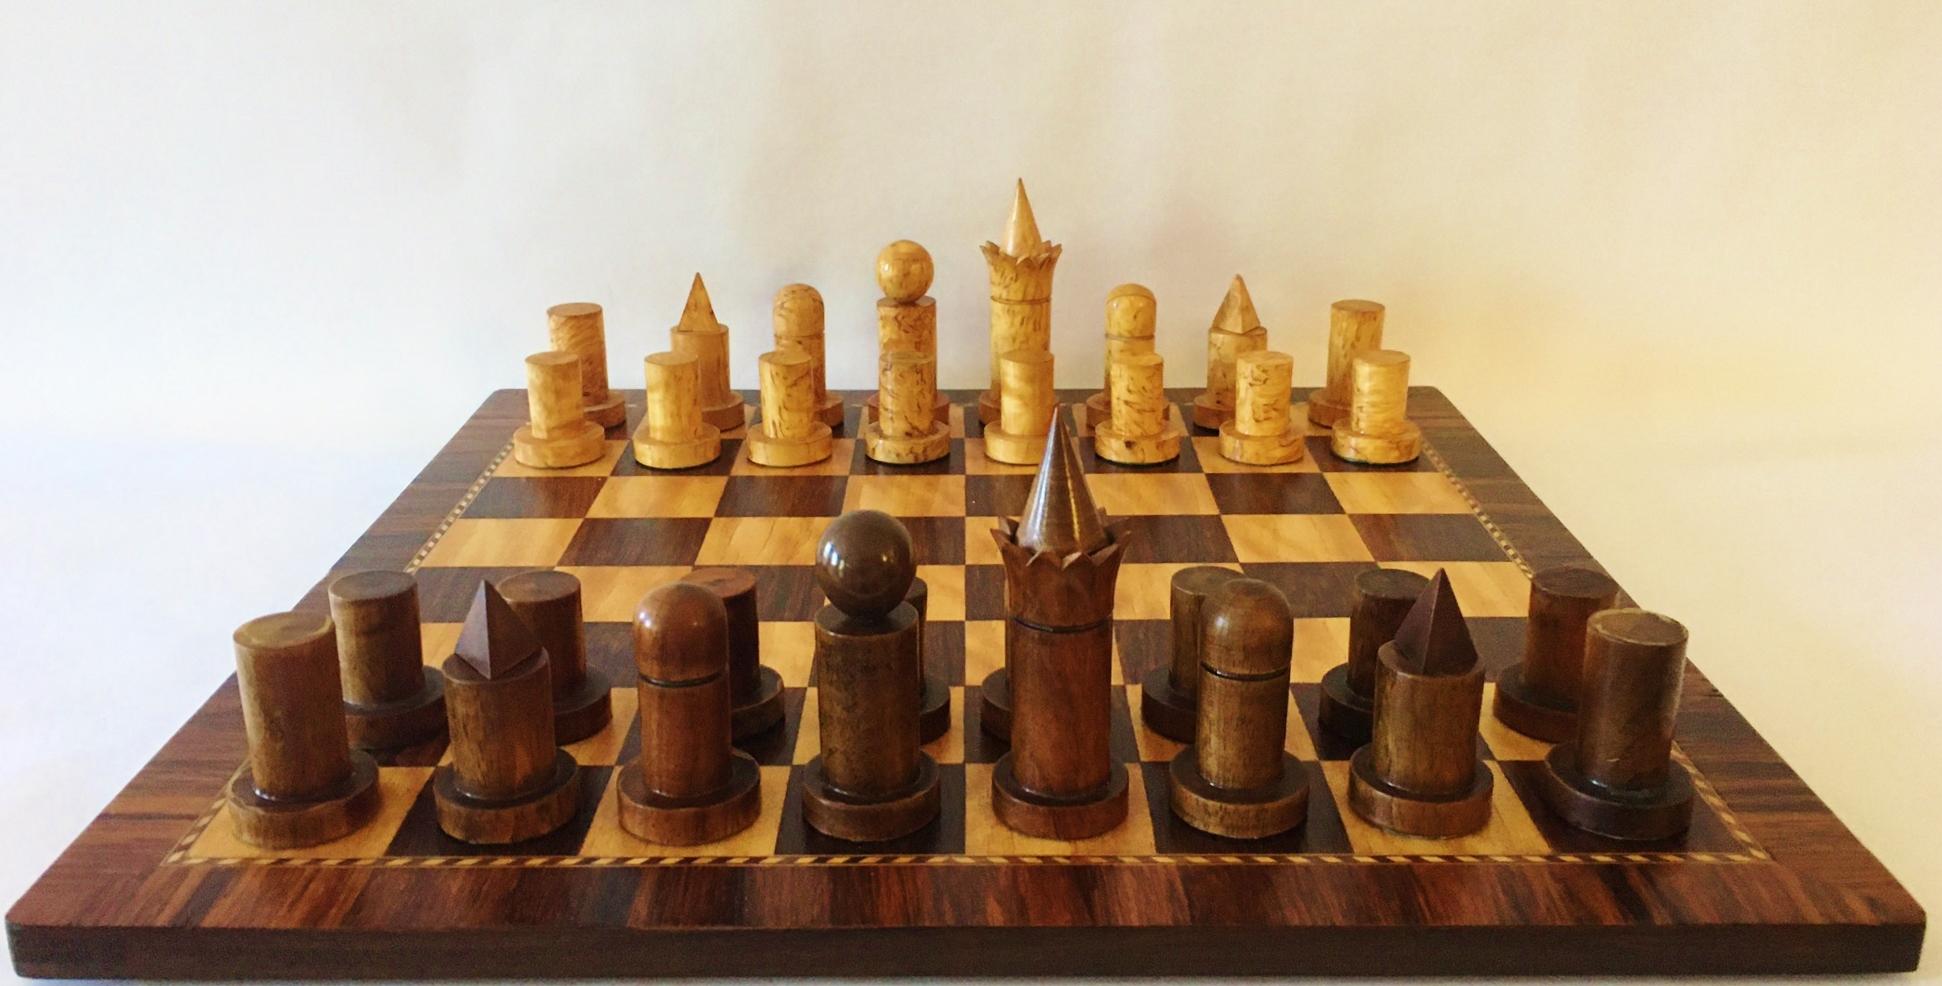 This stunningly hand-crafted, all original, Irish Art Deco chess set features a board with inlaid squares of light and dark finely grained wood surrounded by a dark rope patterned inlaid wood border and edged in a one inch wide, cross-banded, dark